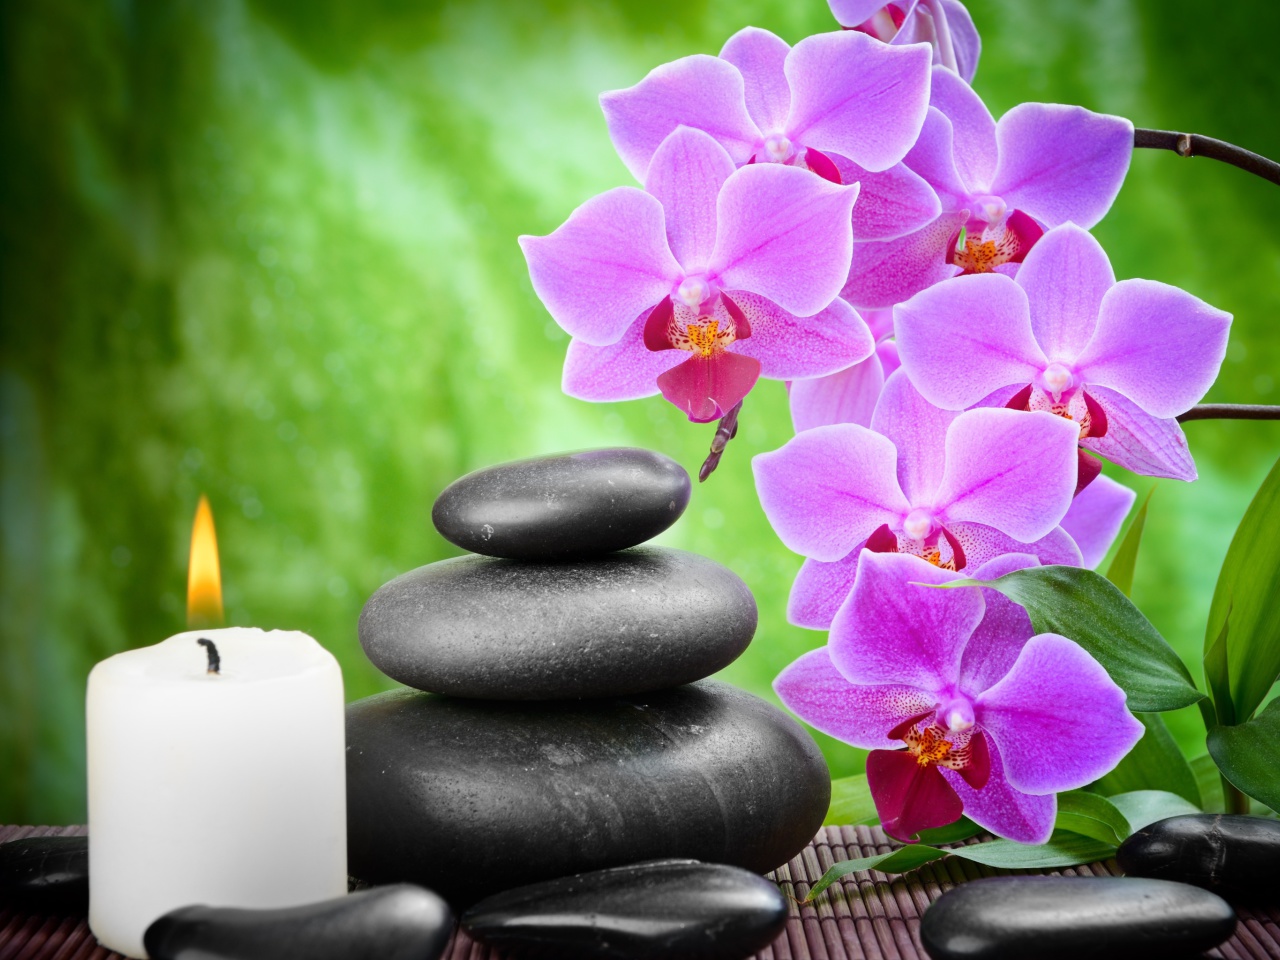 Pebbles, candles and orchids screenshot #1 1280x960